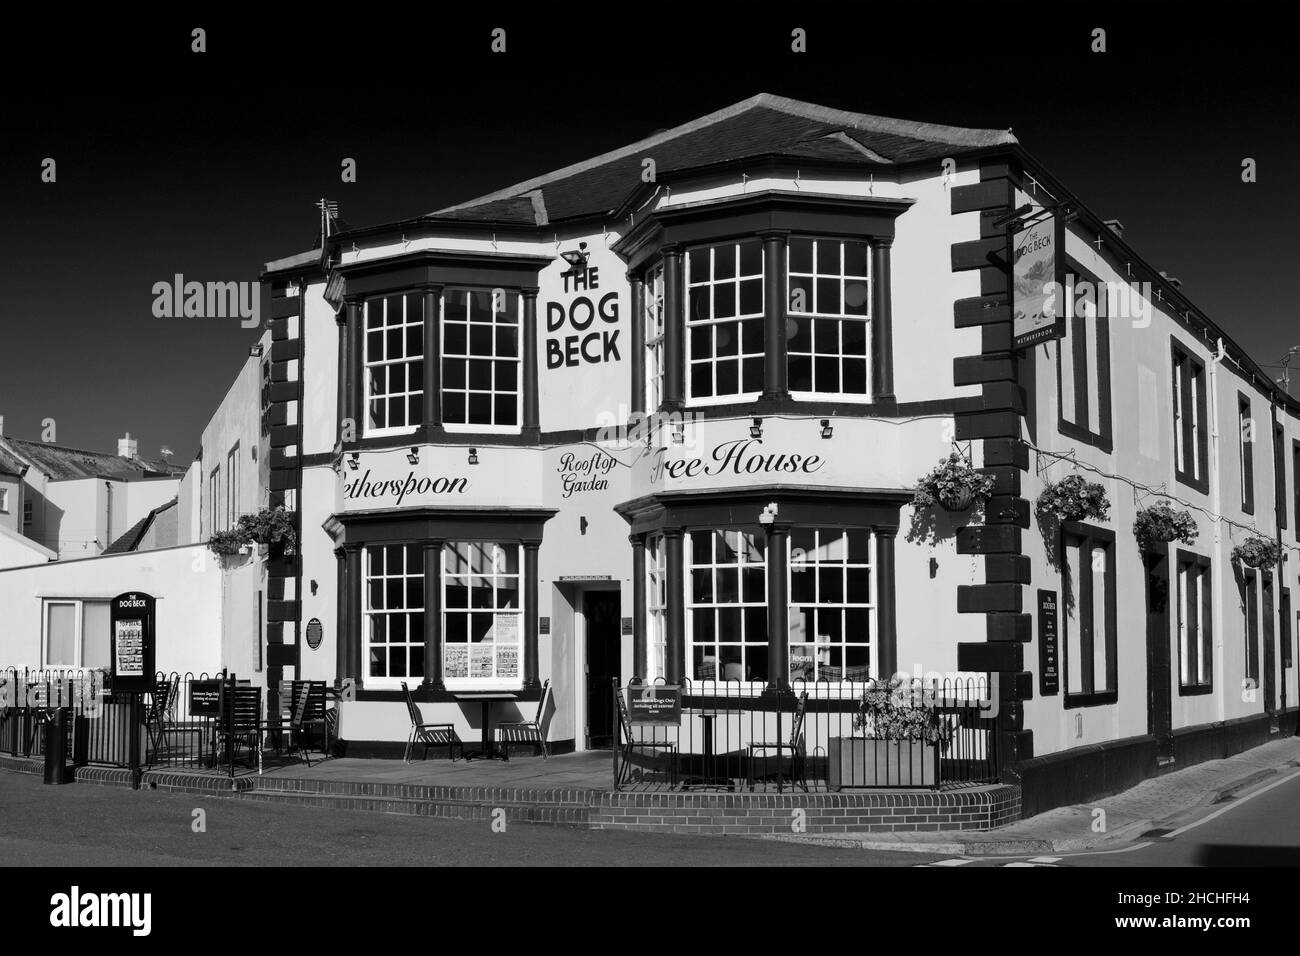 The Dog Beck Weathercuillers pub, Penrith, ville, Cumbria, Angleterre,ROYAUME-UNI Banque D'Images